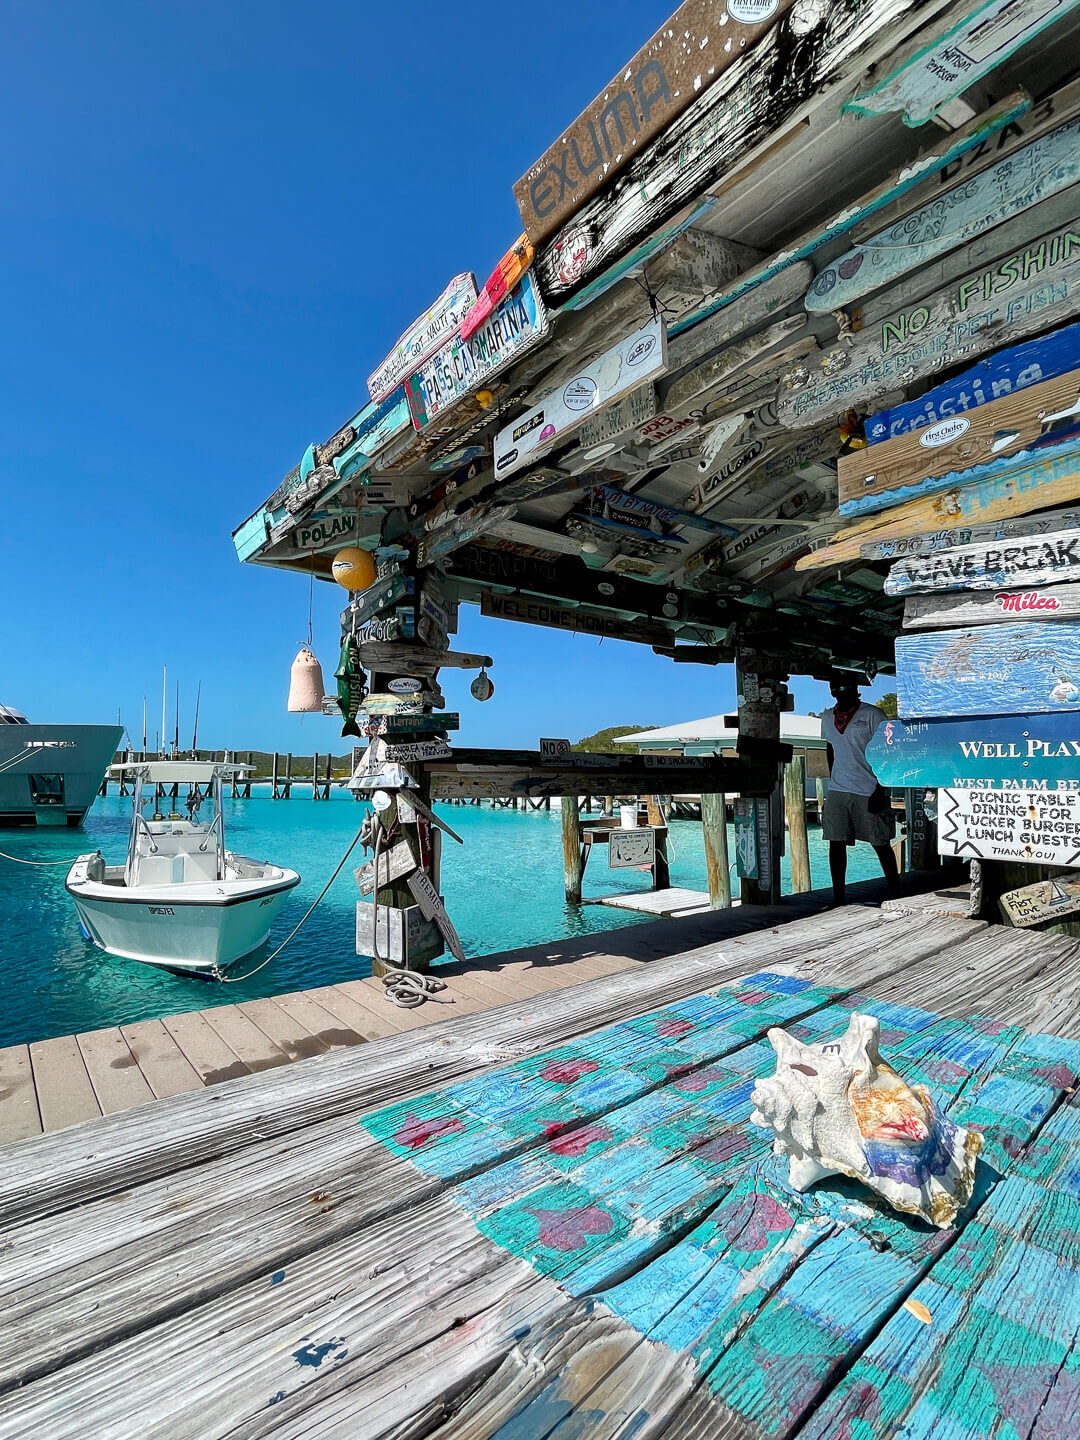 Colorful wood signs left by past travelers give Compass Cay its quirky character.